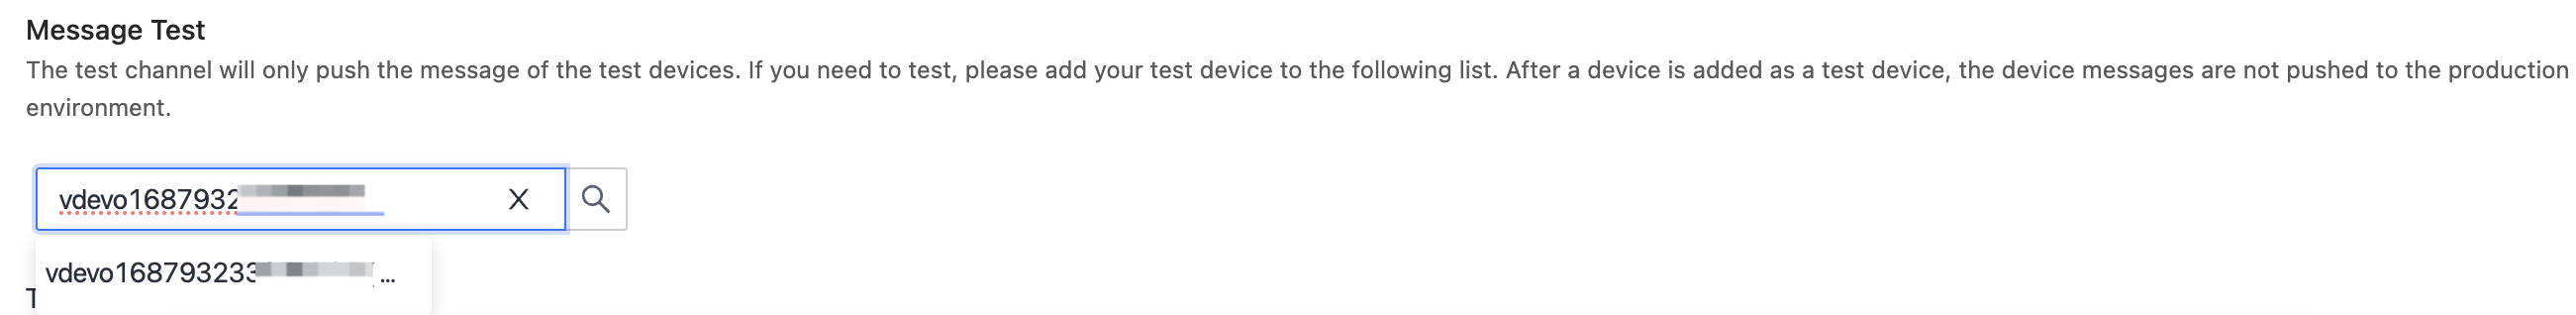 test_devices.png